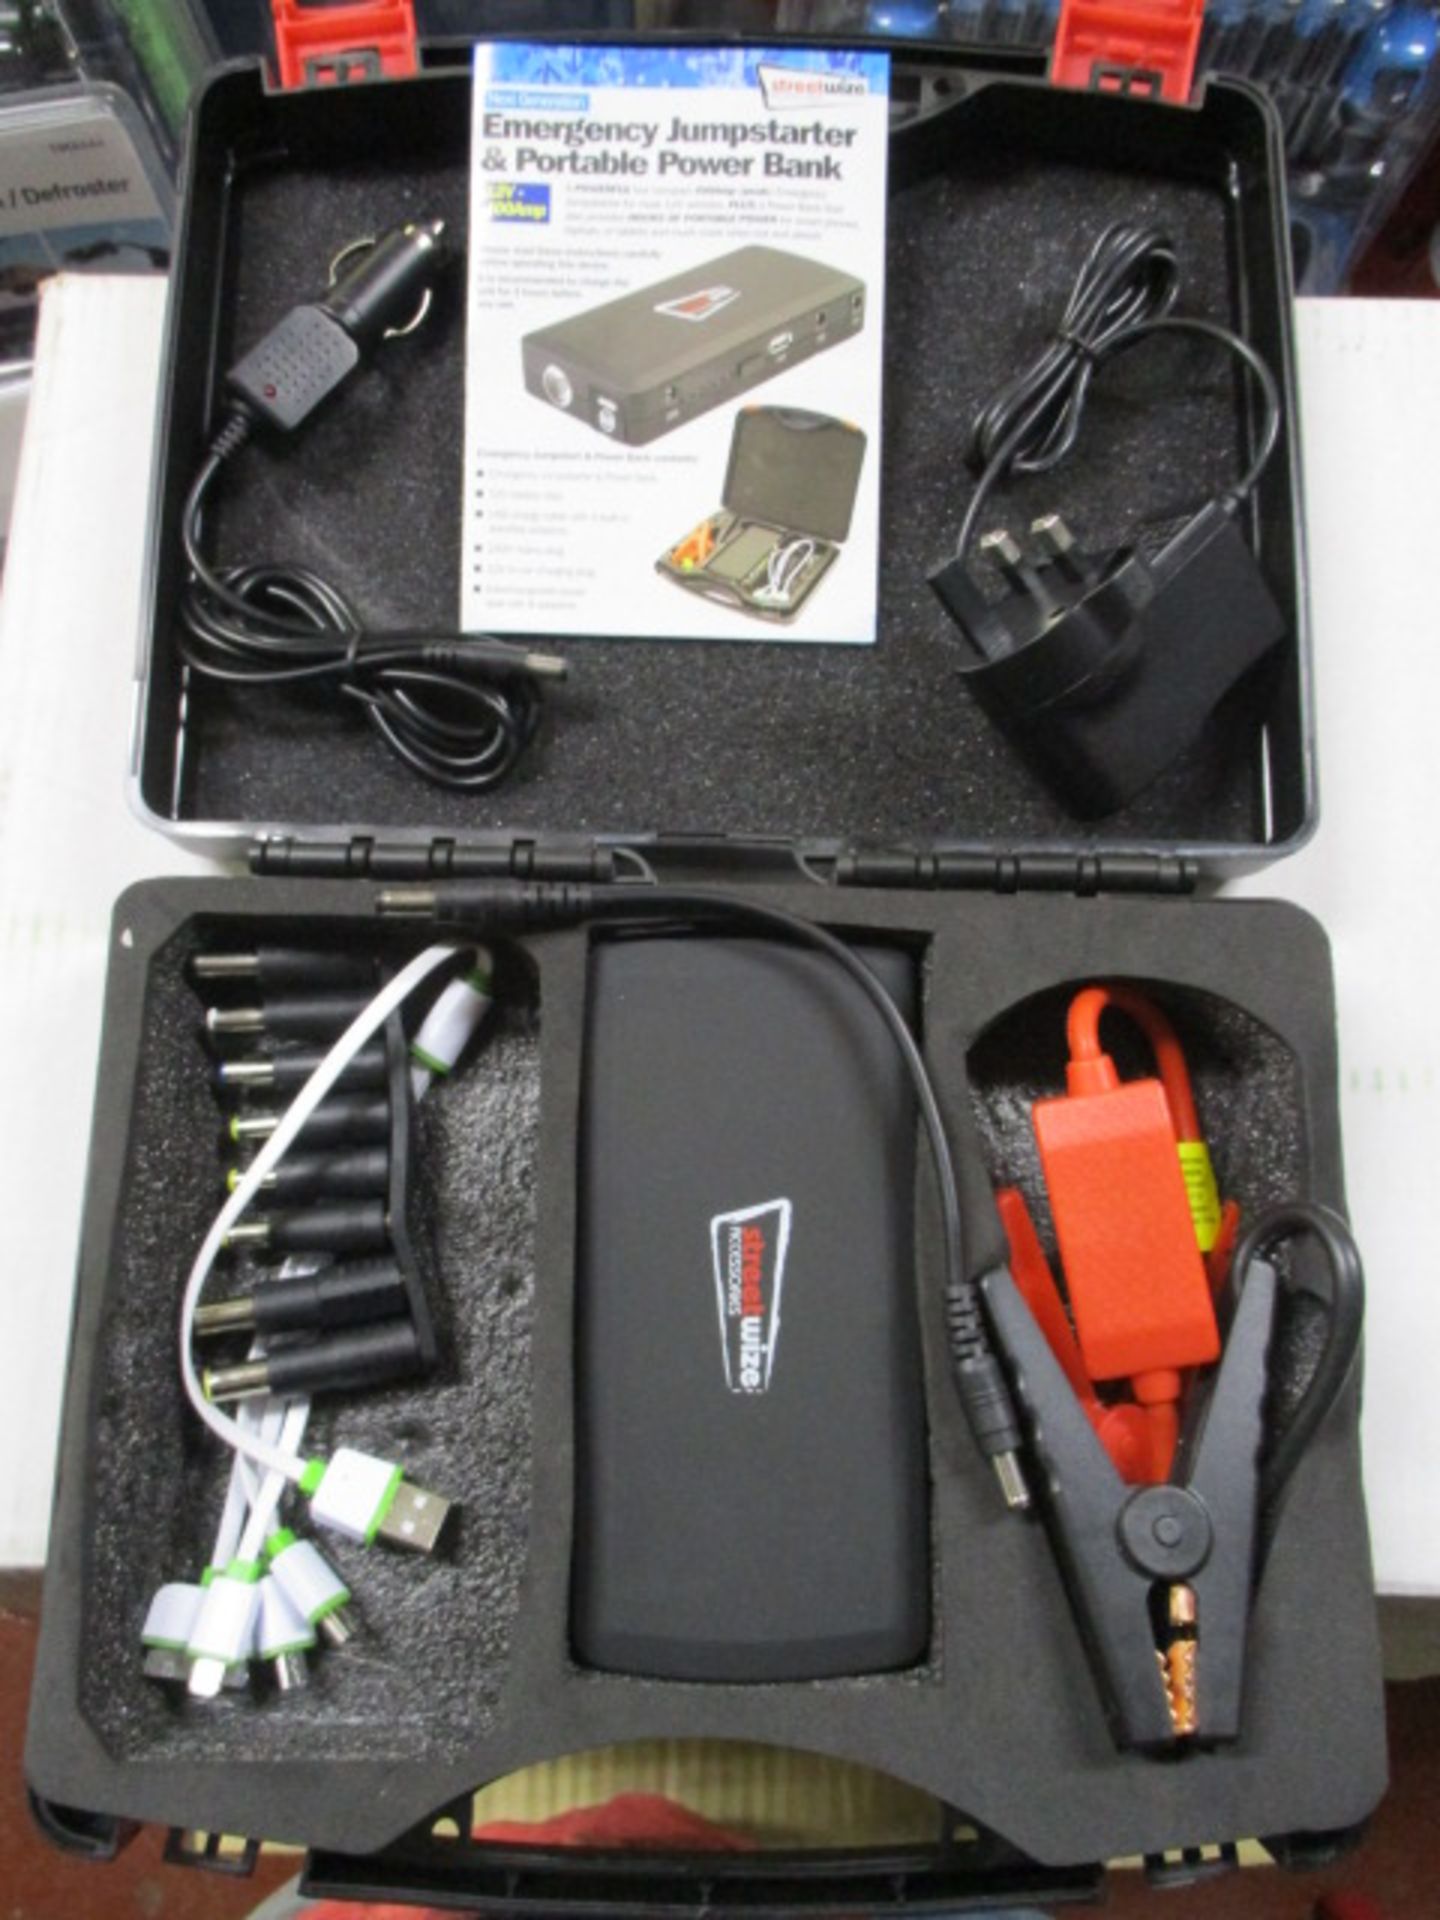 Brand New Streetwize Emergency Jumpstarter & Portable Powerbank 12V-400amp in carry case rrp £79. - Image 2 of 2